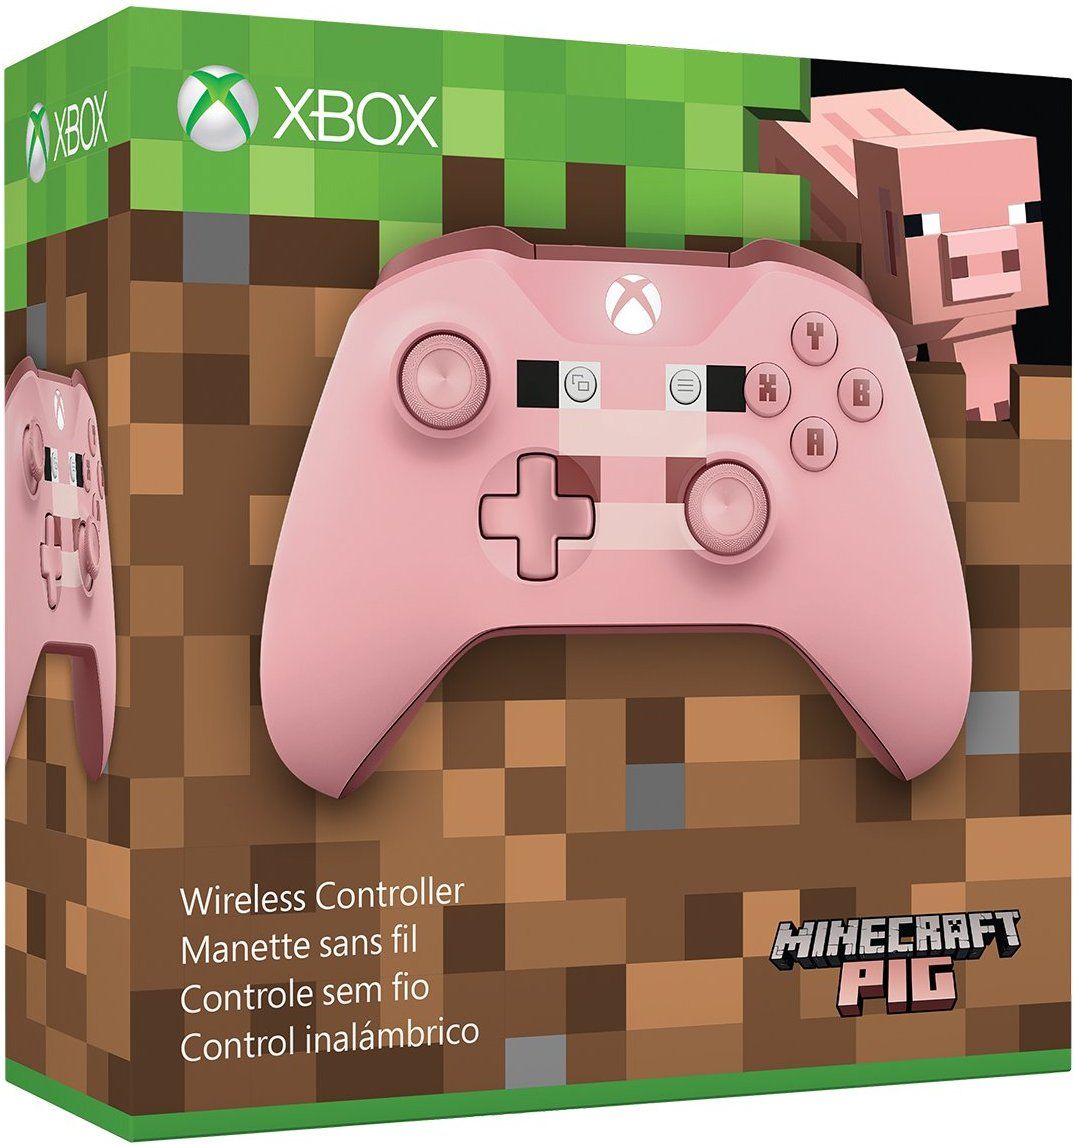 use ps3 controller on windows 10 for minecraft